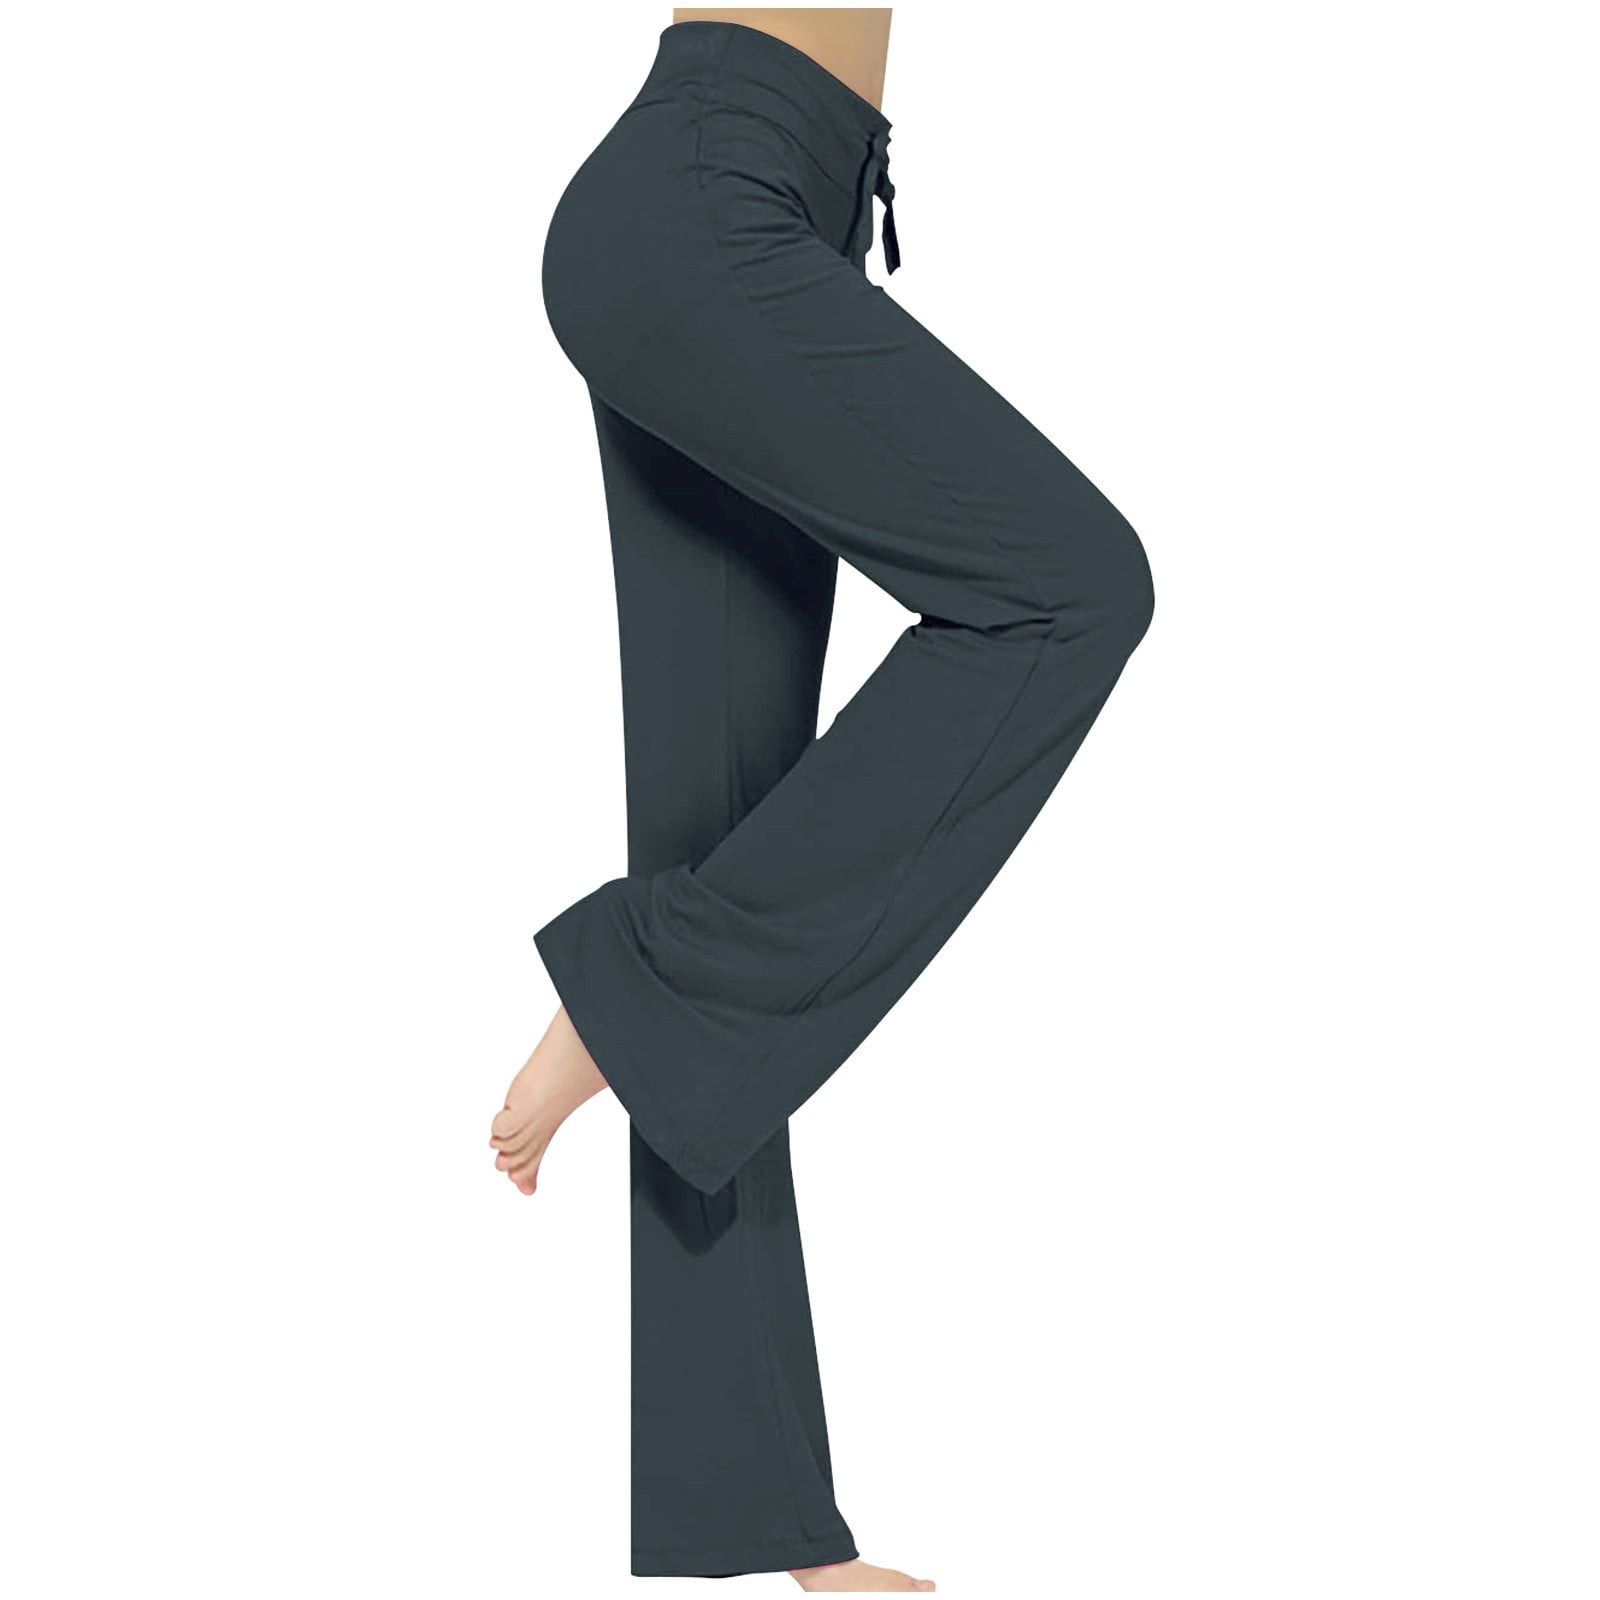 Ayolanni Compression Leggings for Women Women's Loose High